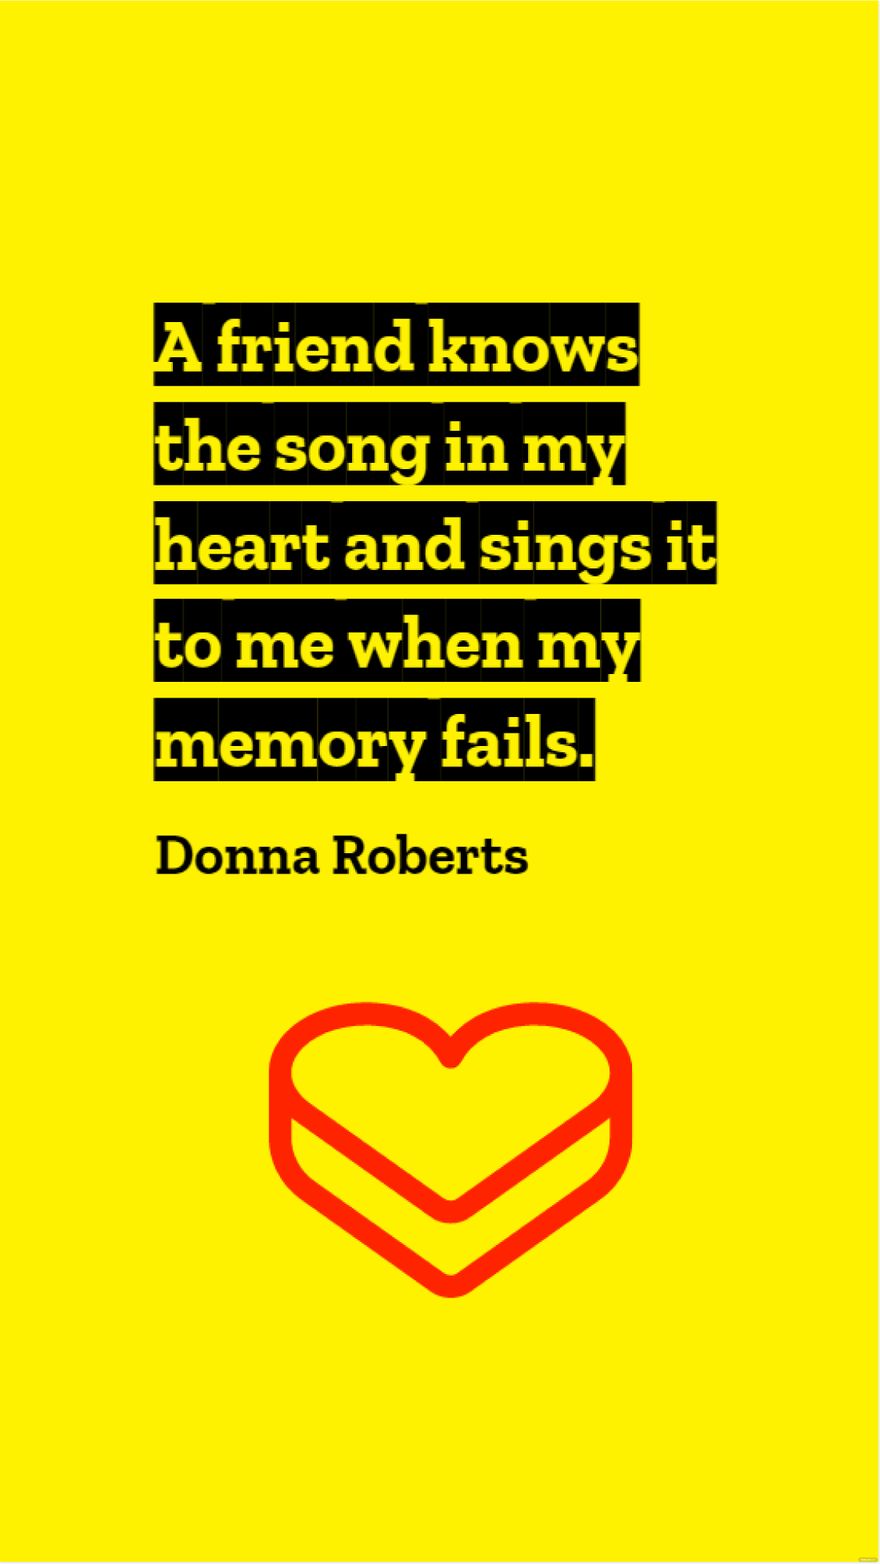 Donna Roberts - A friend knows the song in my heart and sings it to me when my memory fails.